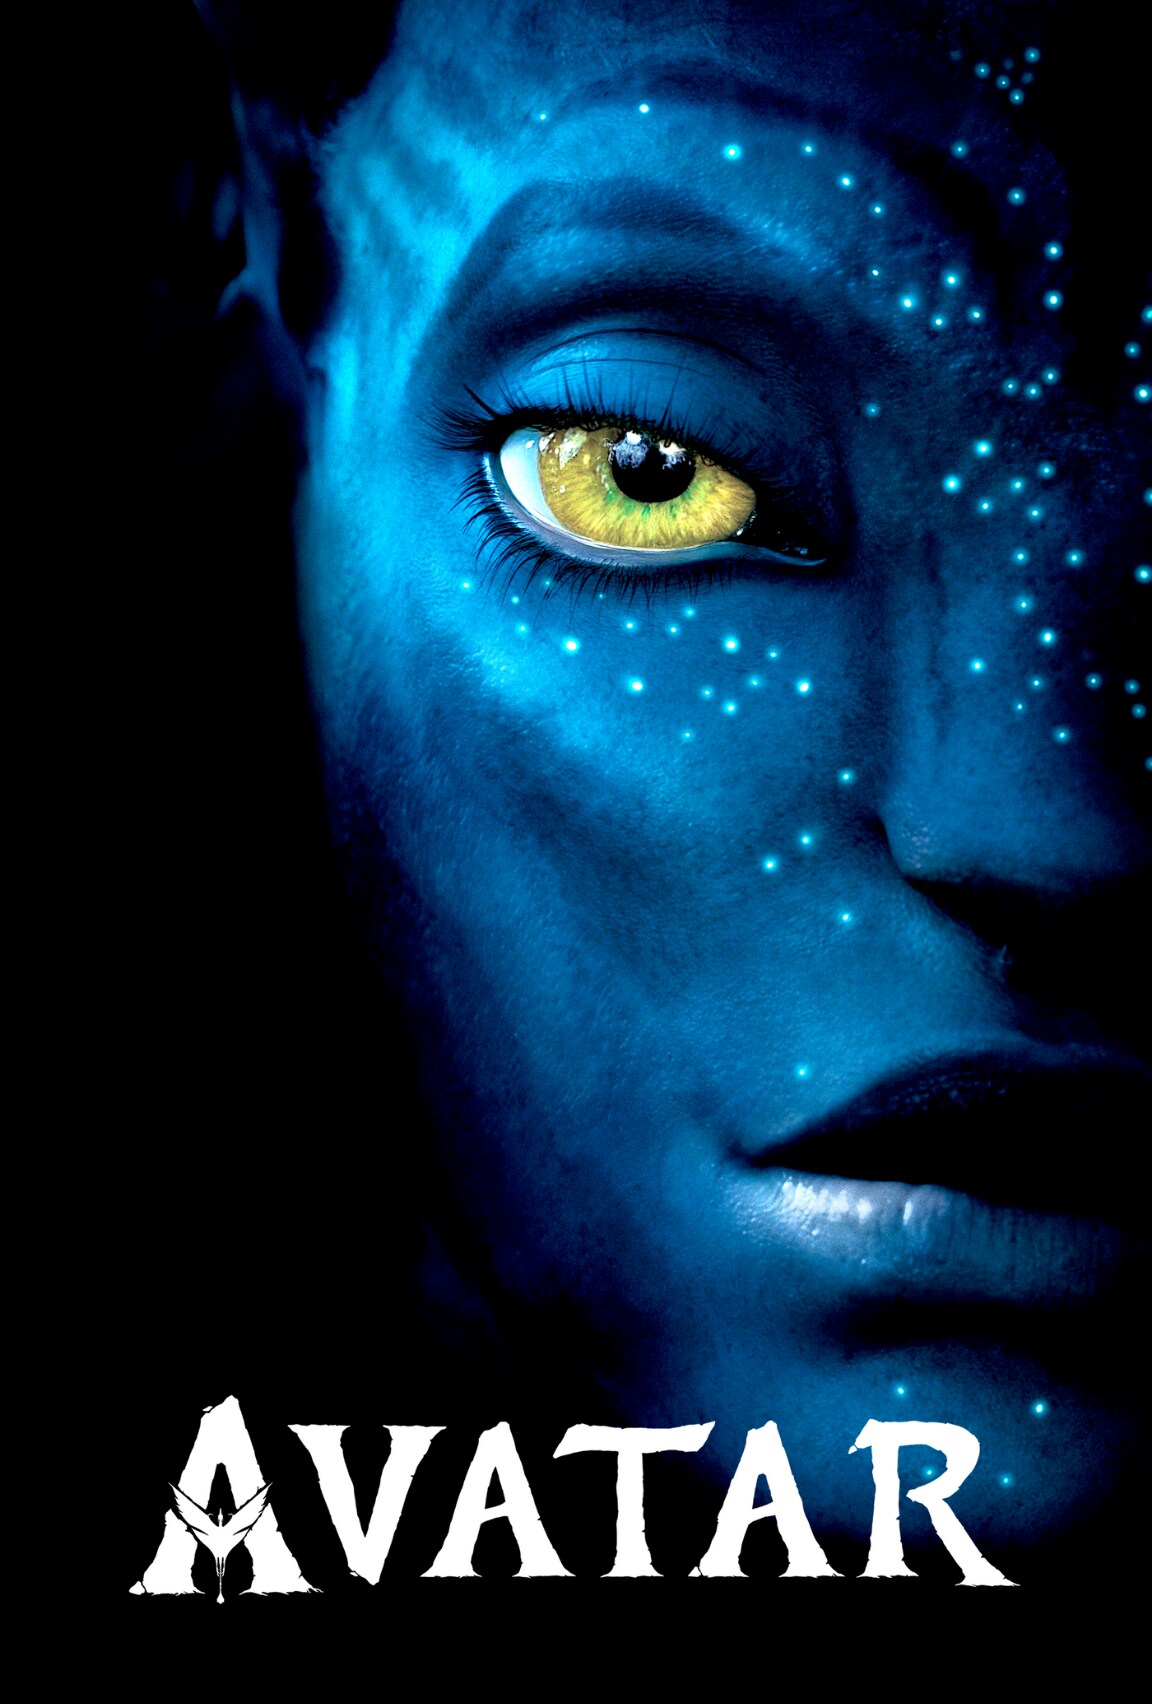 A close up image of a blue faced character from Avatar.